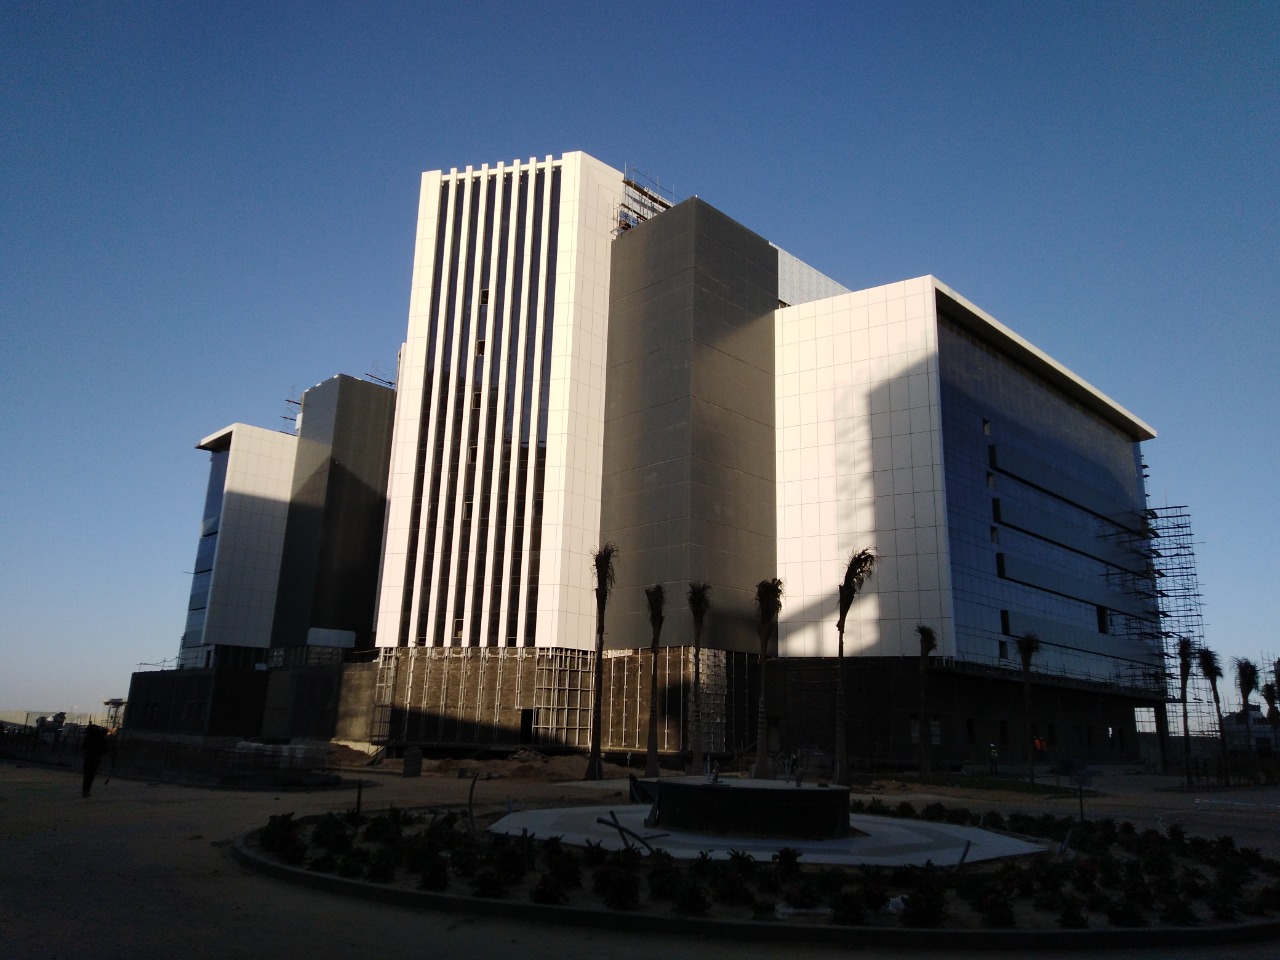 HEADQUARTERS OF THE ADMINISTRATIVE CONTROL AUTHORITY, NEW CAPITAL